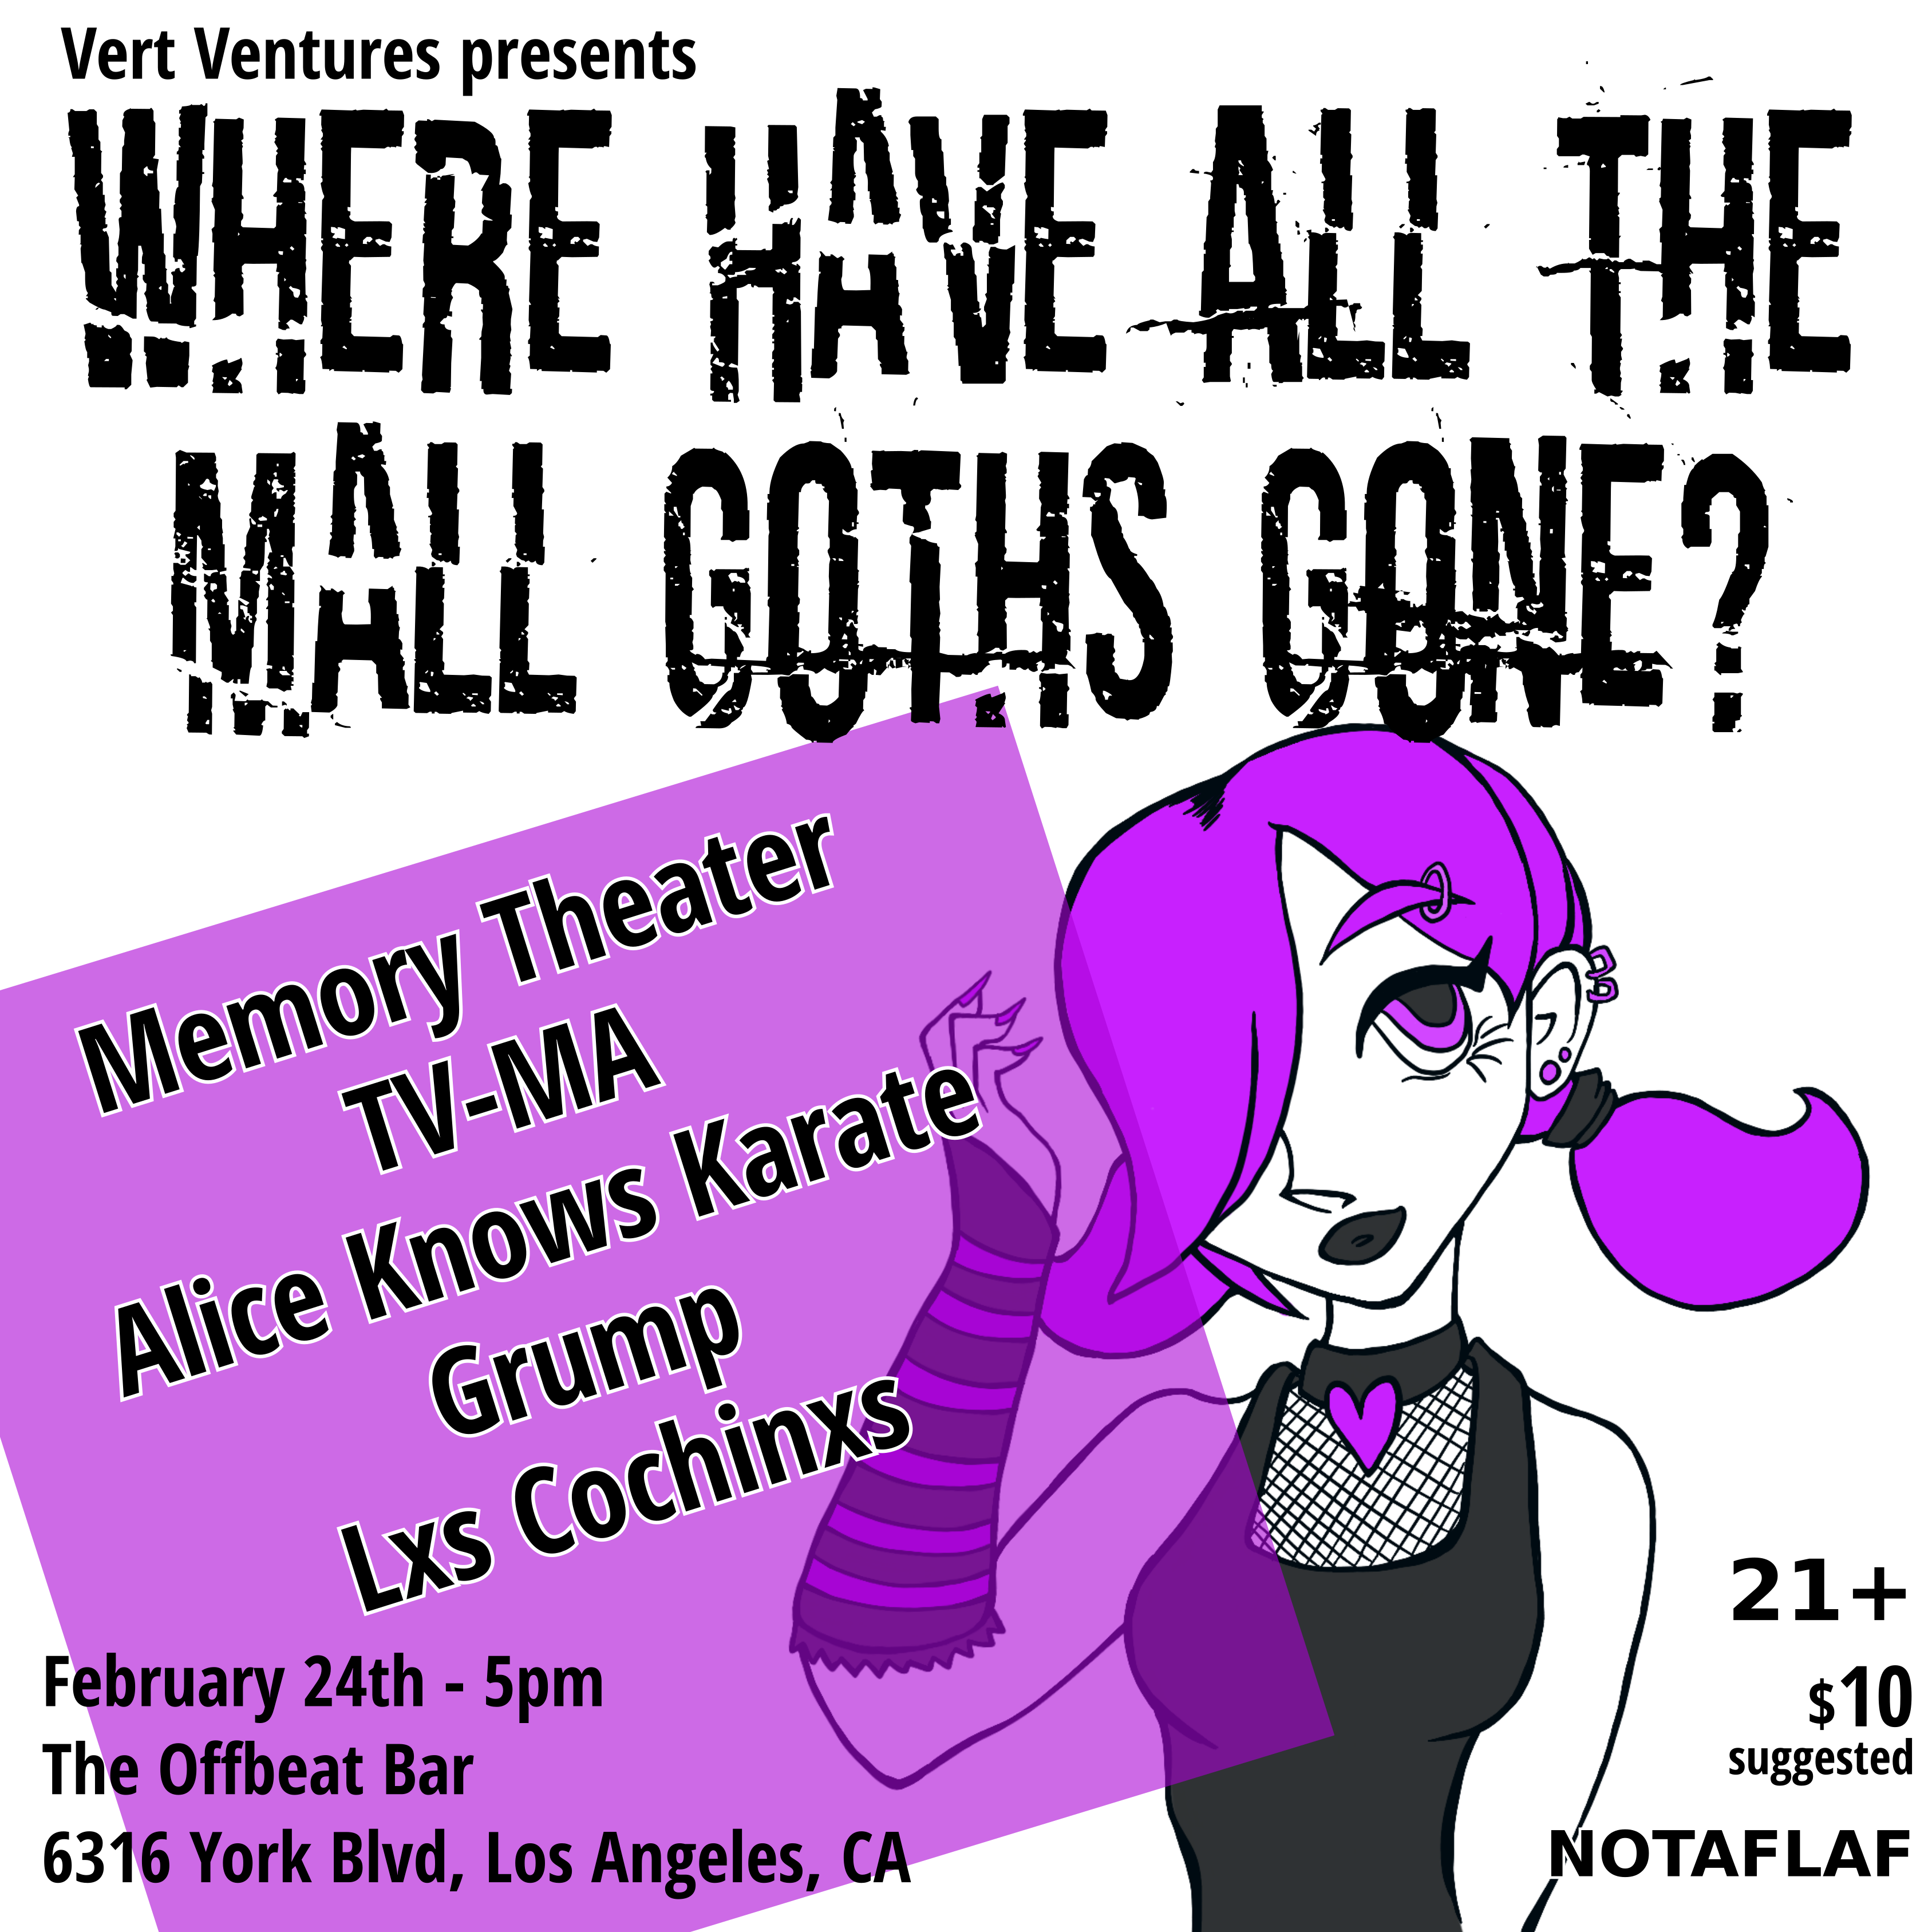 Vert Ventures Presents “Where Have All the Mall Goths Gone?” Memory Theater, TV-MA, Alice Knows Karate, Grump, Lxs Cochinxs. February 24th – 5pm. The Offbeat Bar, 6316 York Blvd, Los Angeles, Ca. 21+, $10 suggested, NOTAFLAF.